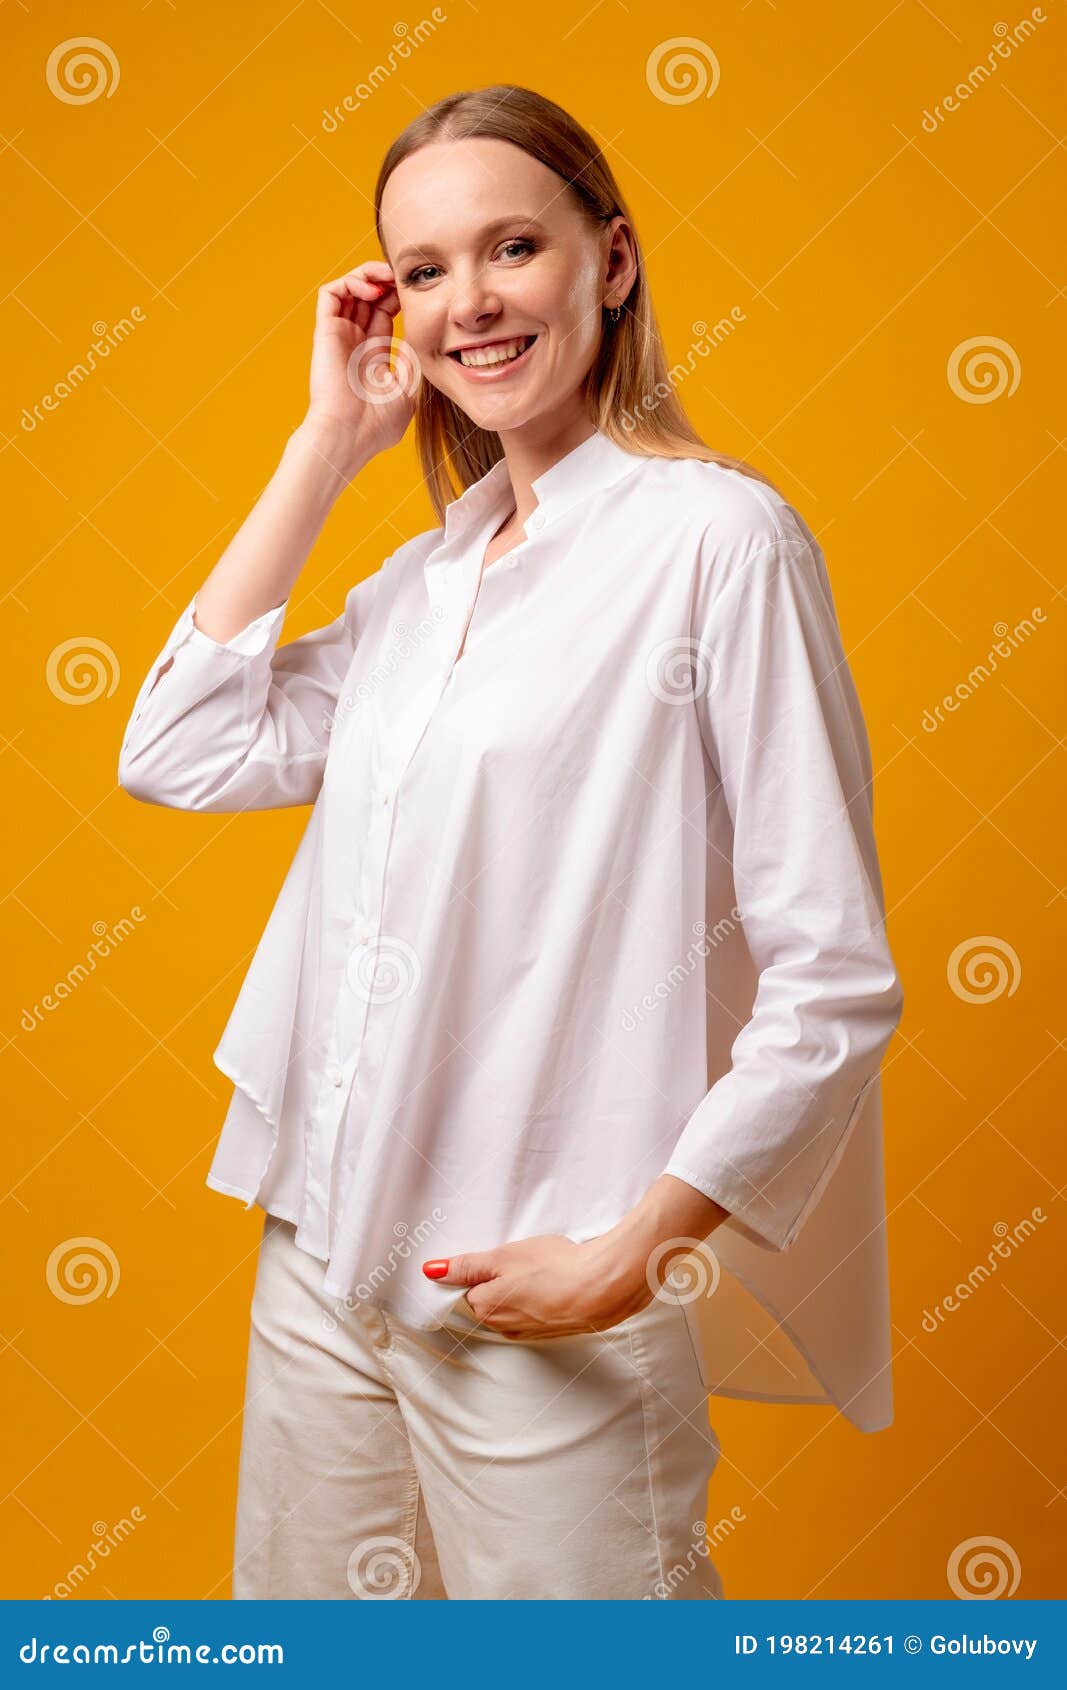 Successful Woman Portrait Female Lifestyle Growth Stock Image - Image ...